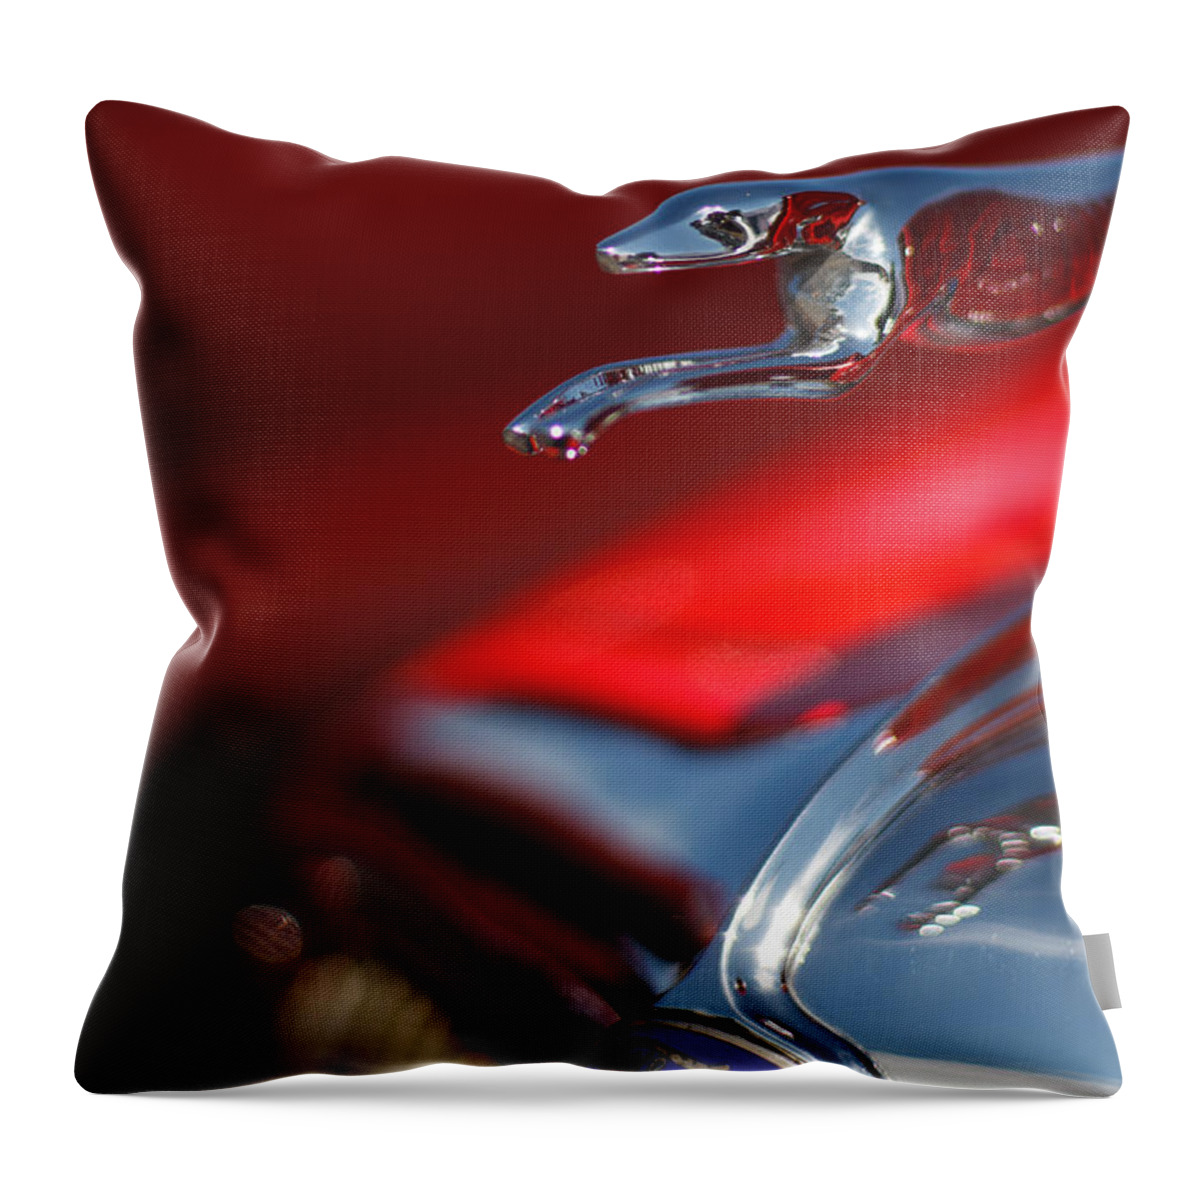 1934 Throw Pillow featuring the photograph 1934 Ford Coupe Hood Ornament with Ford Emblem by T Lowry Wilson